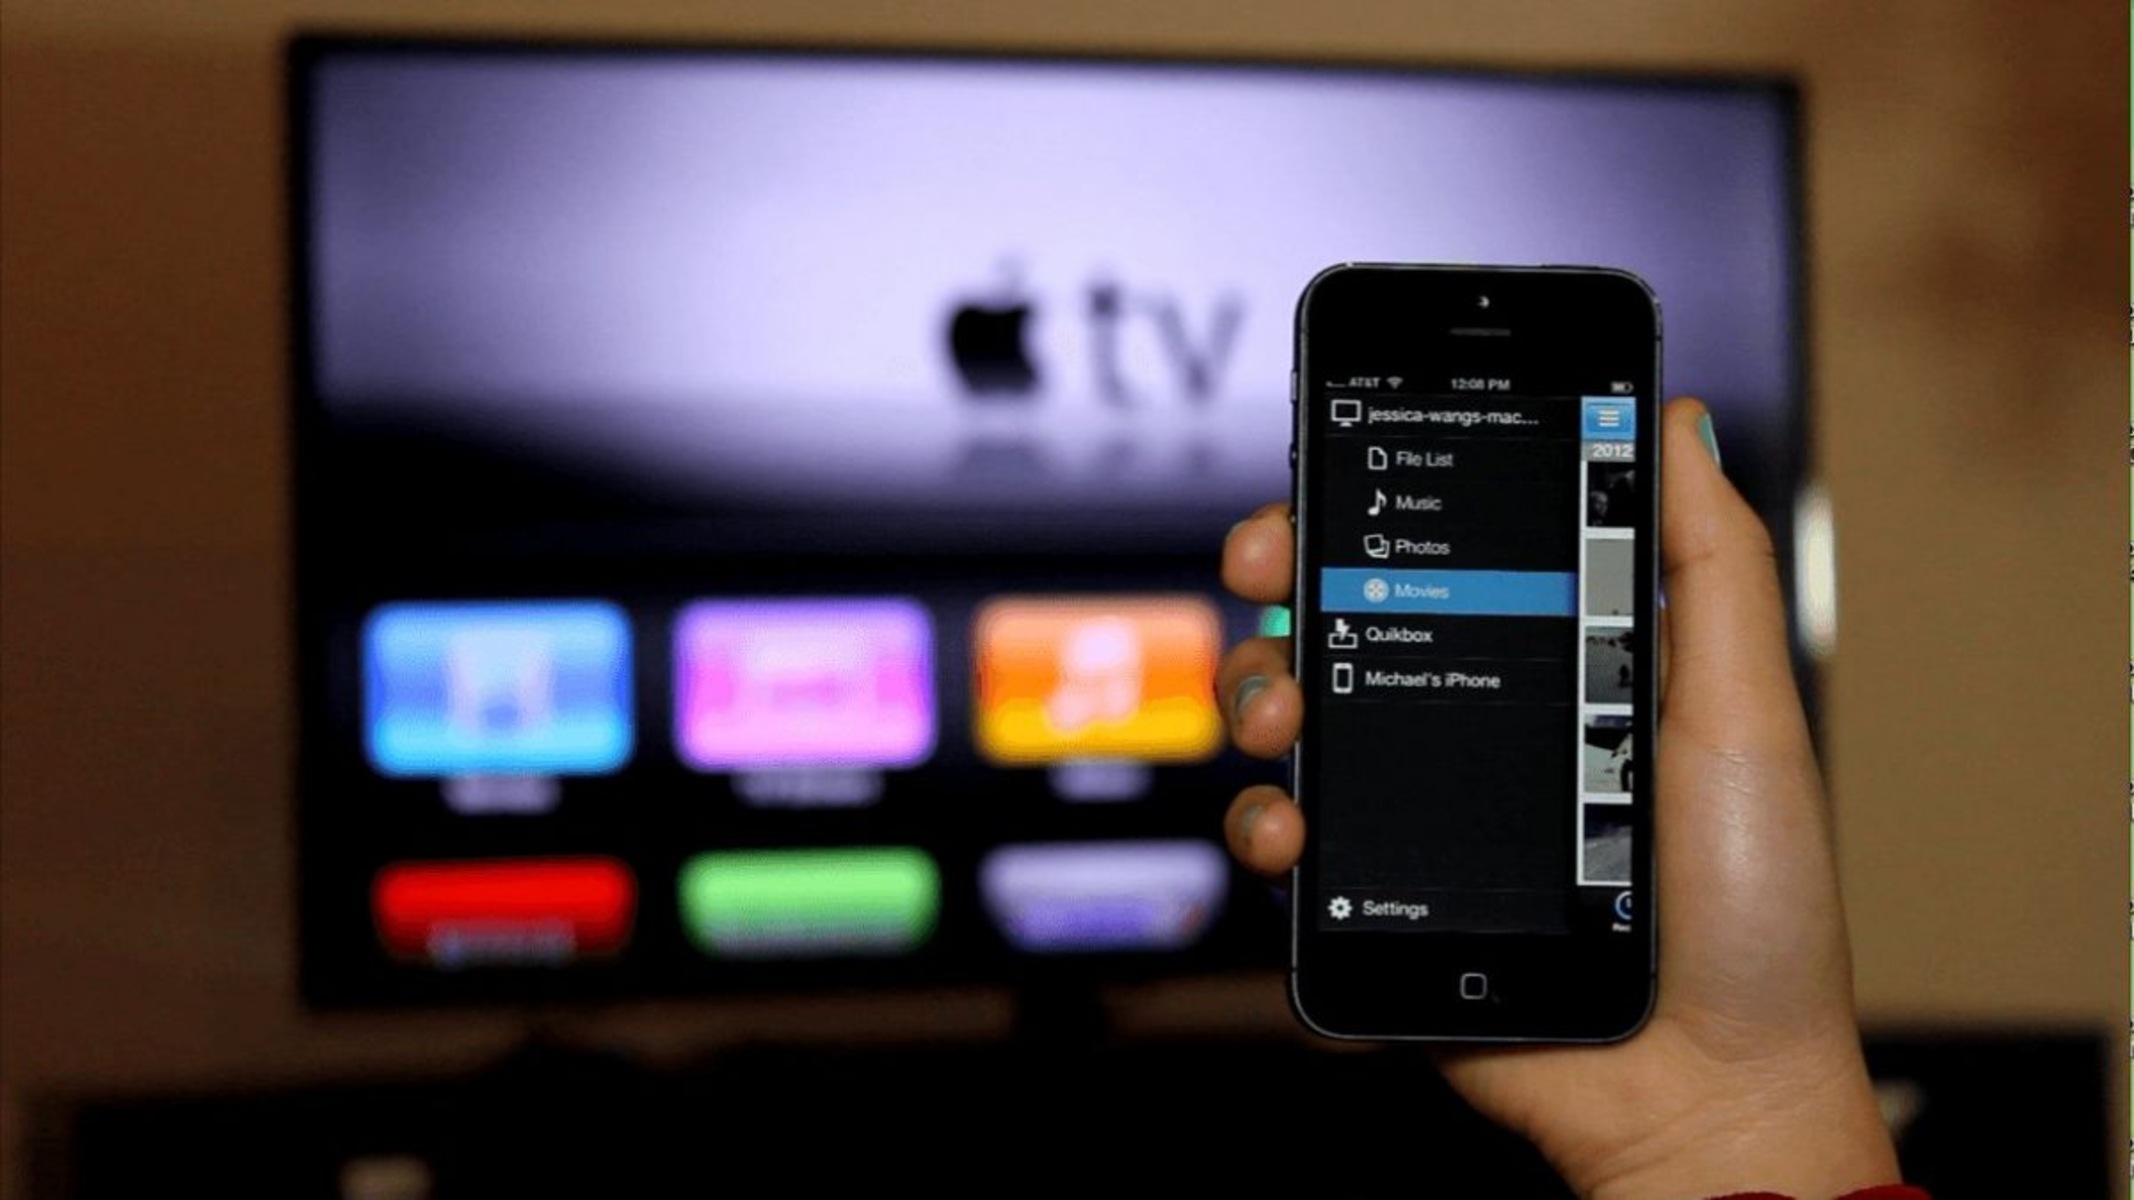 Linking TV To IPhone Hotspot: A User-Friendly Approach